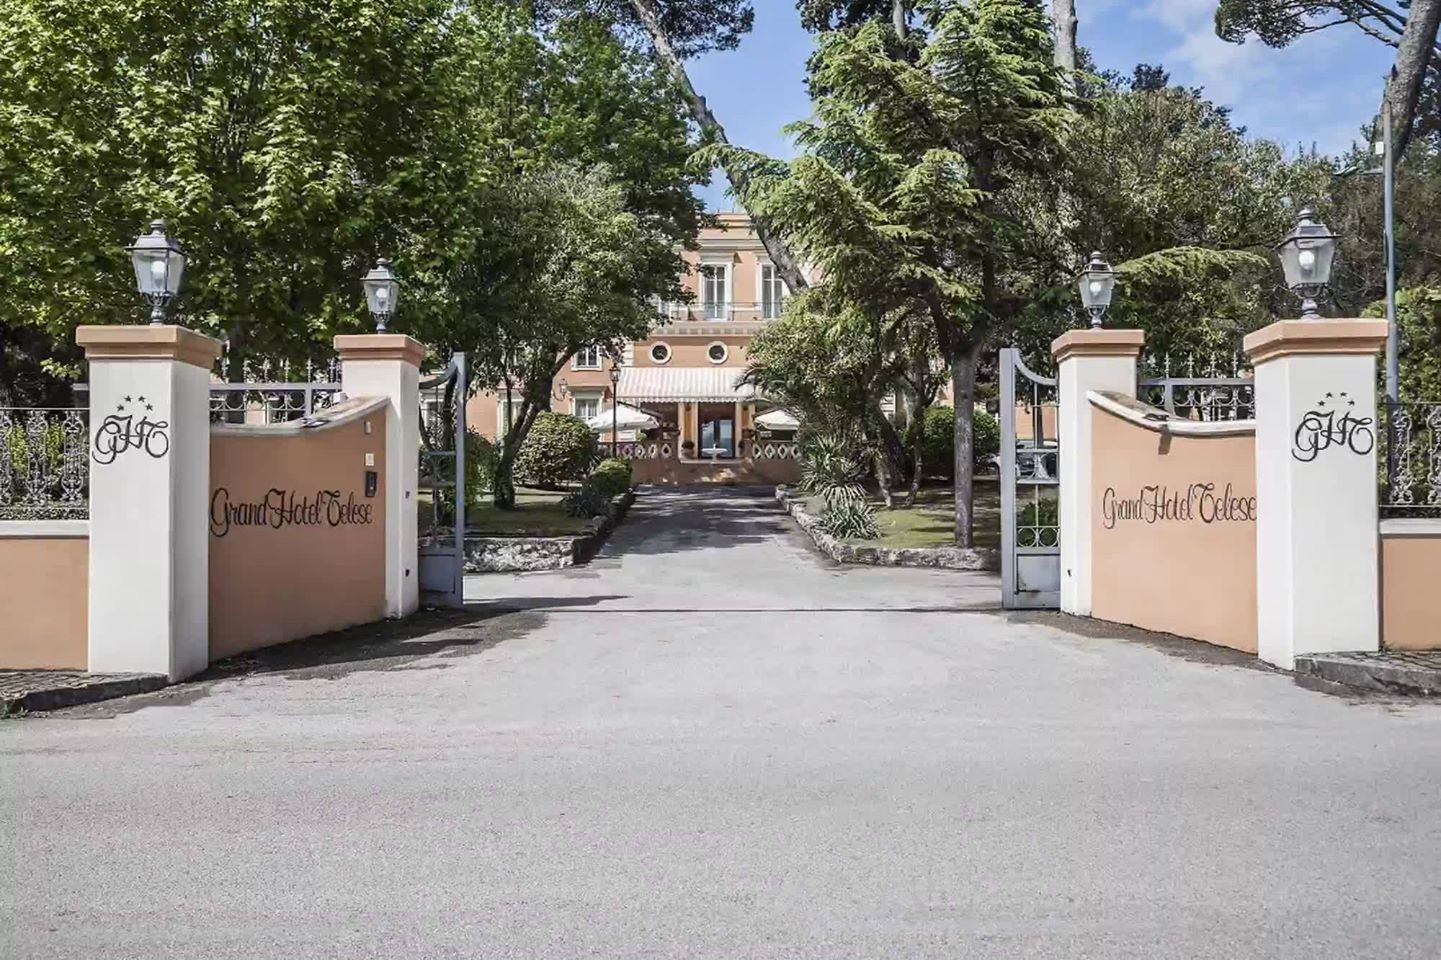 Entrance to the Grand Hotel Telese Terme